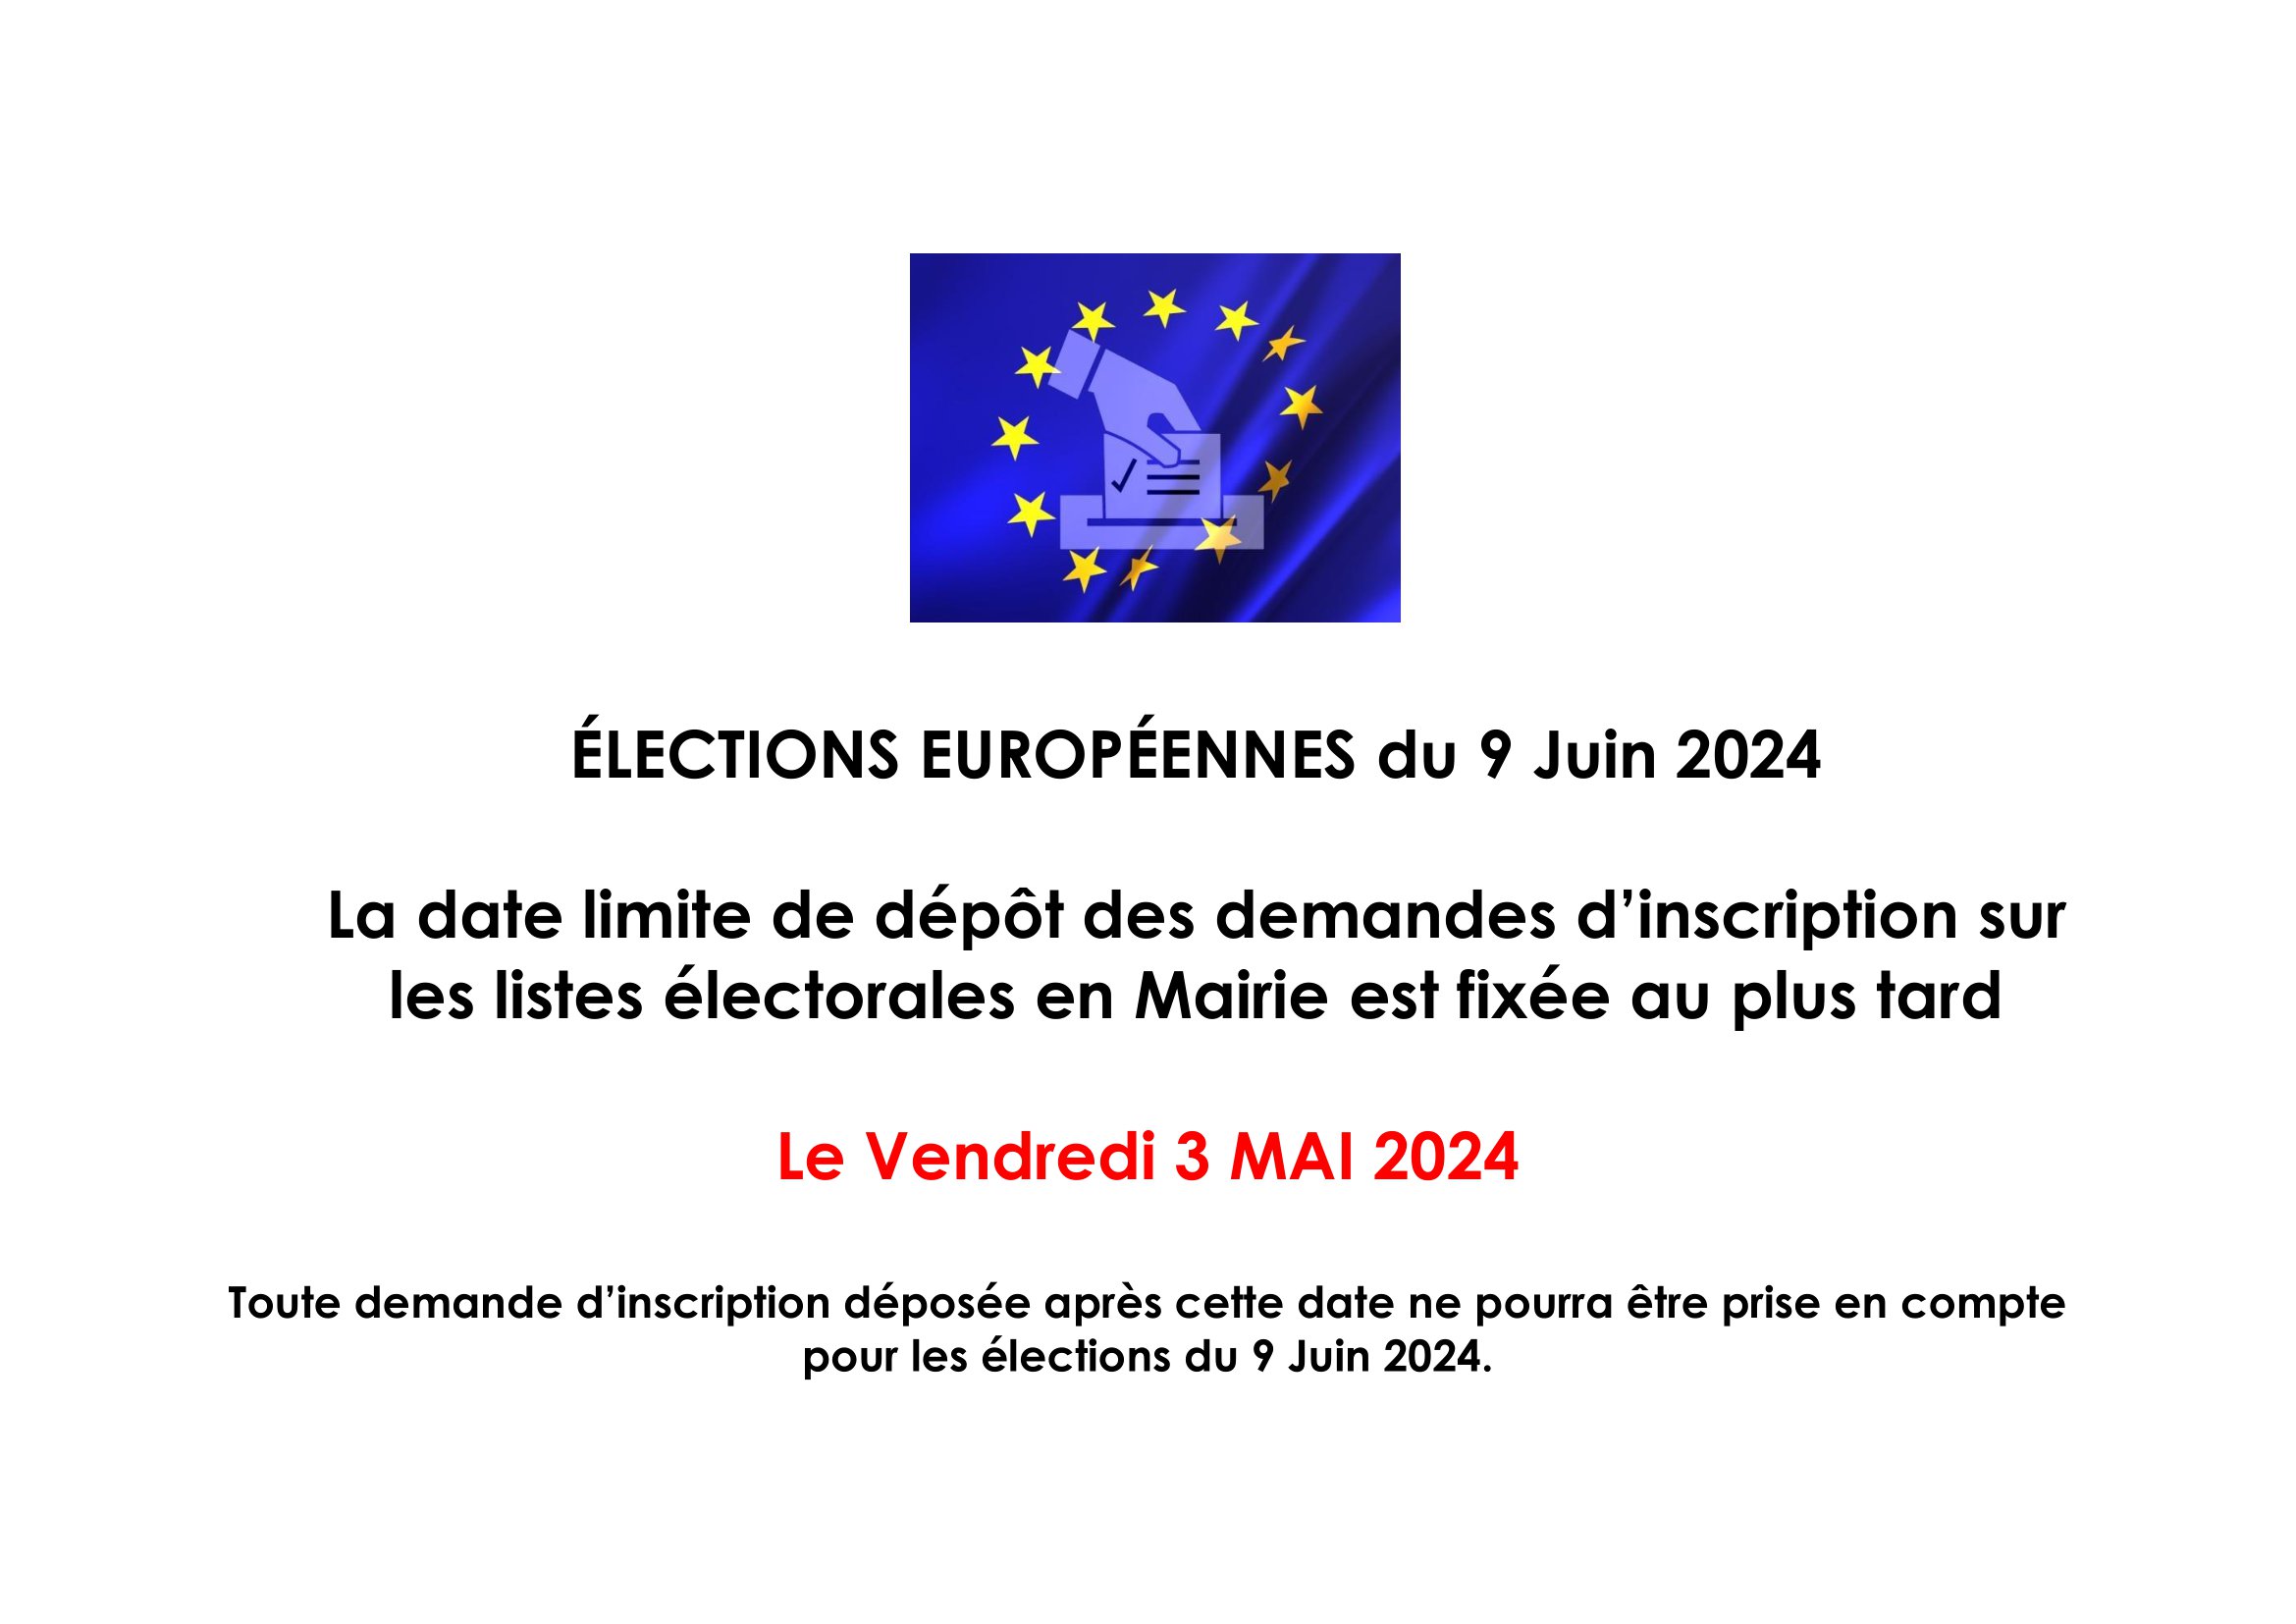 ELECTIONS EUROPEENNES 09062024